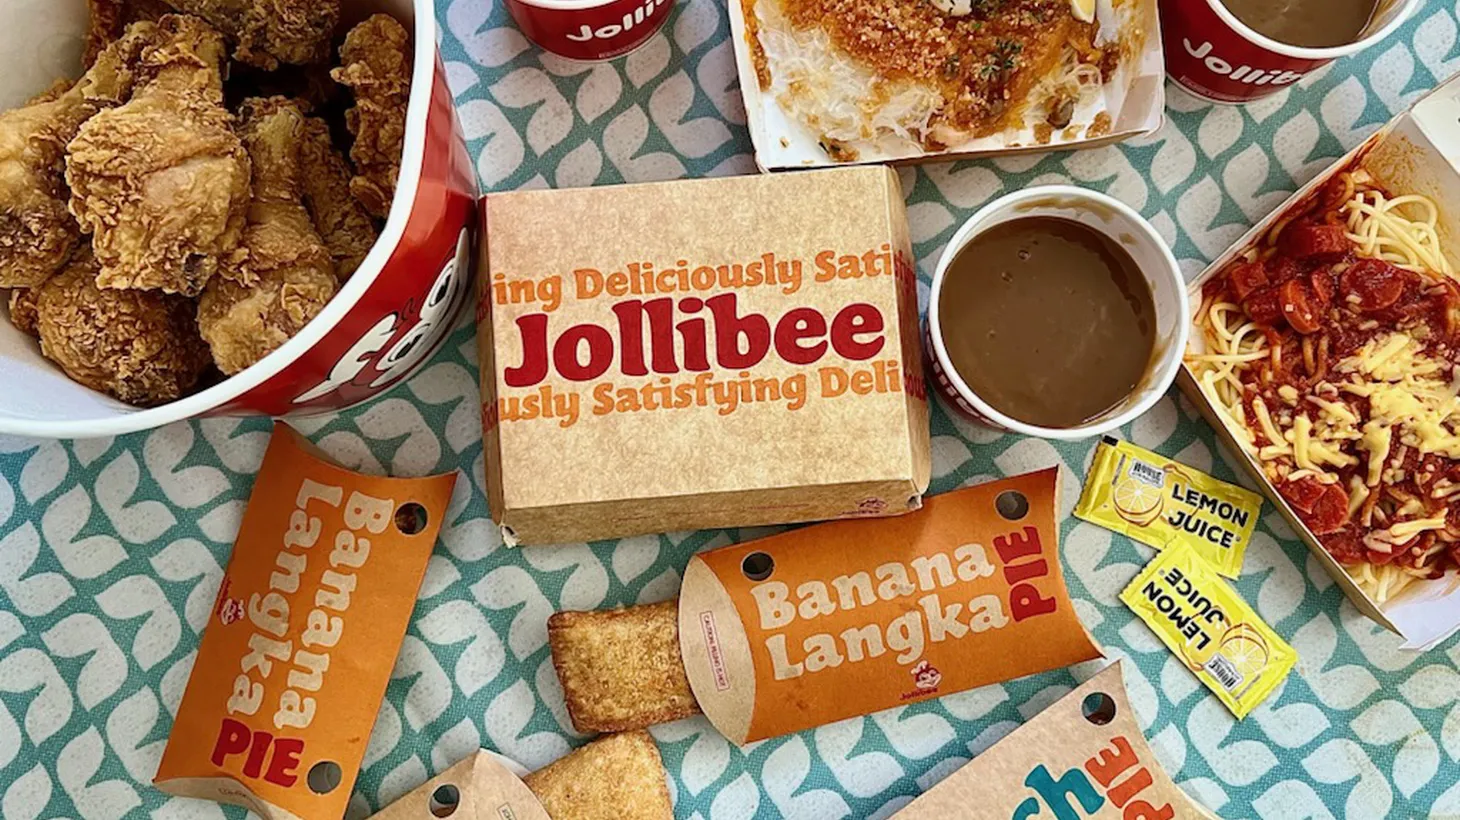 Jollibee, a Filipino fried chicken chain, is opening in downtown Los Angeles with hopes of global expansion.